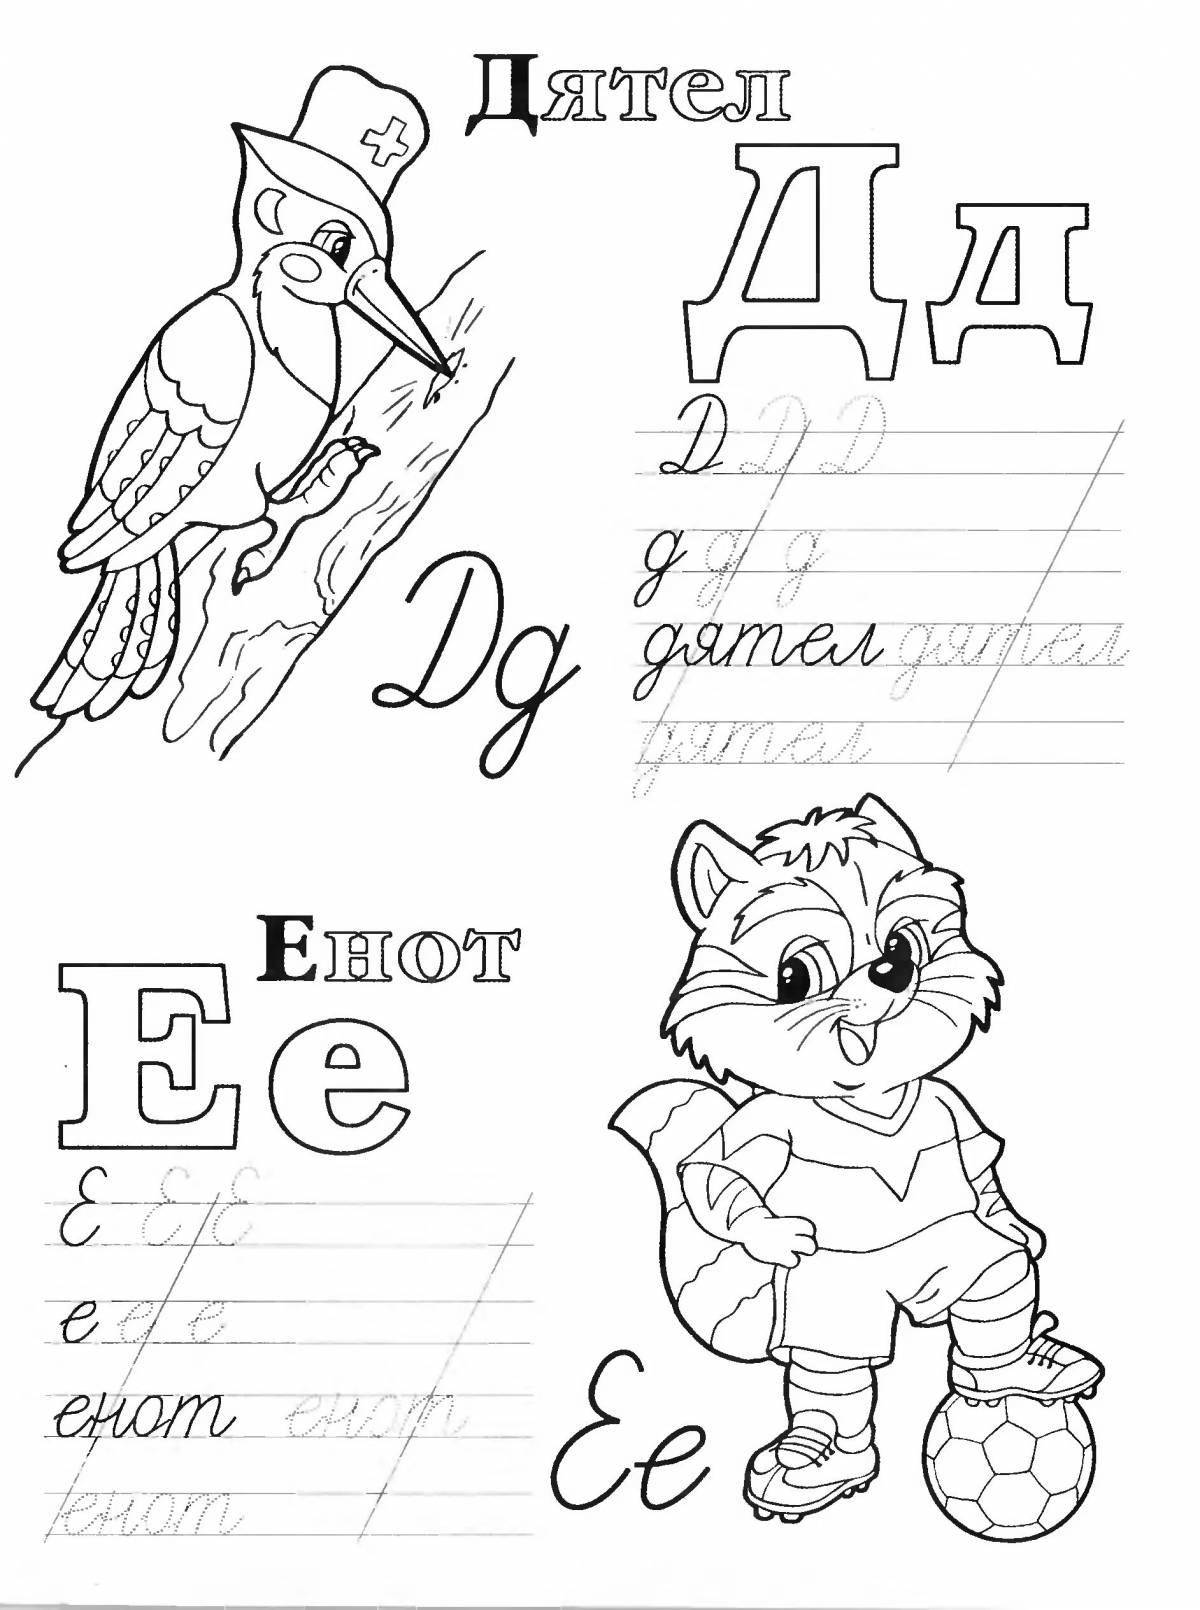 Colorful alphabet coloring page